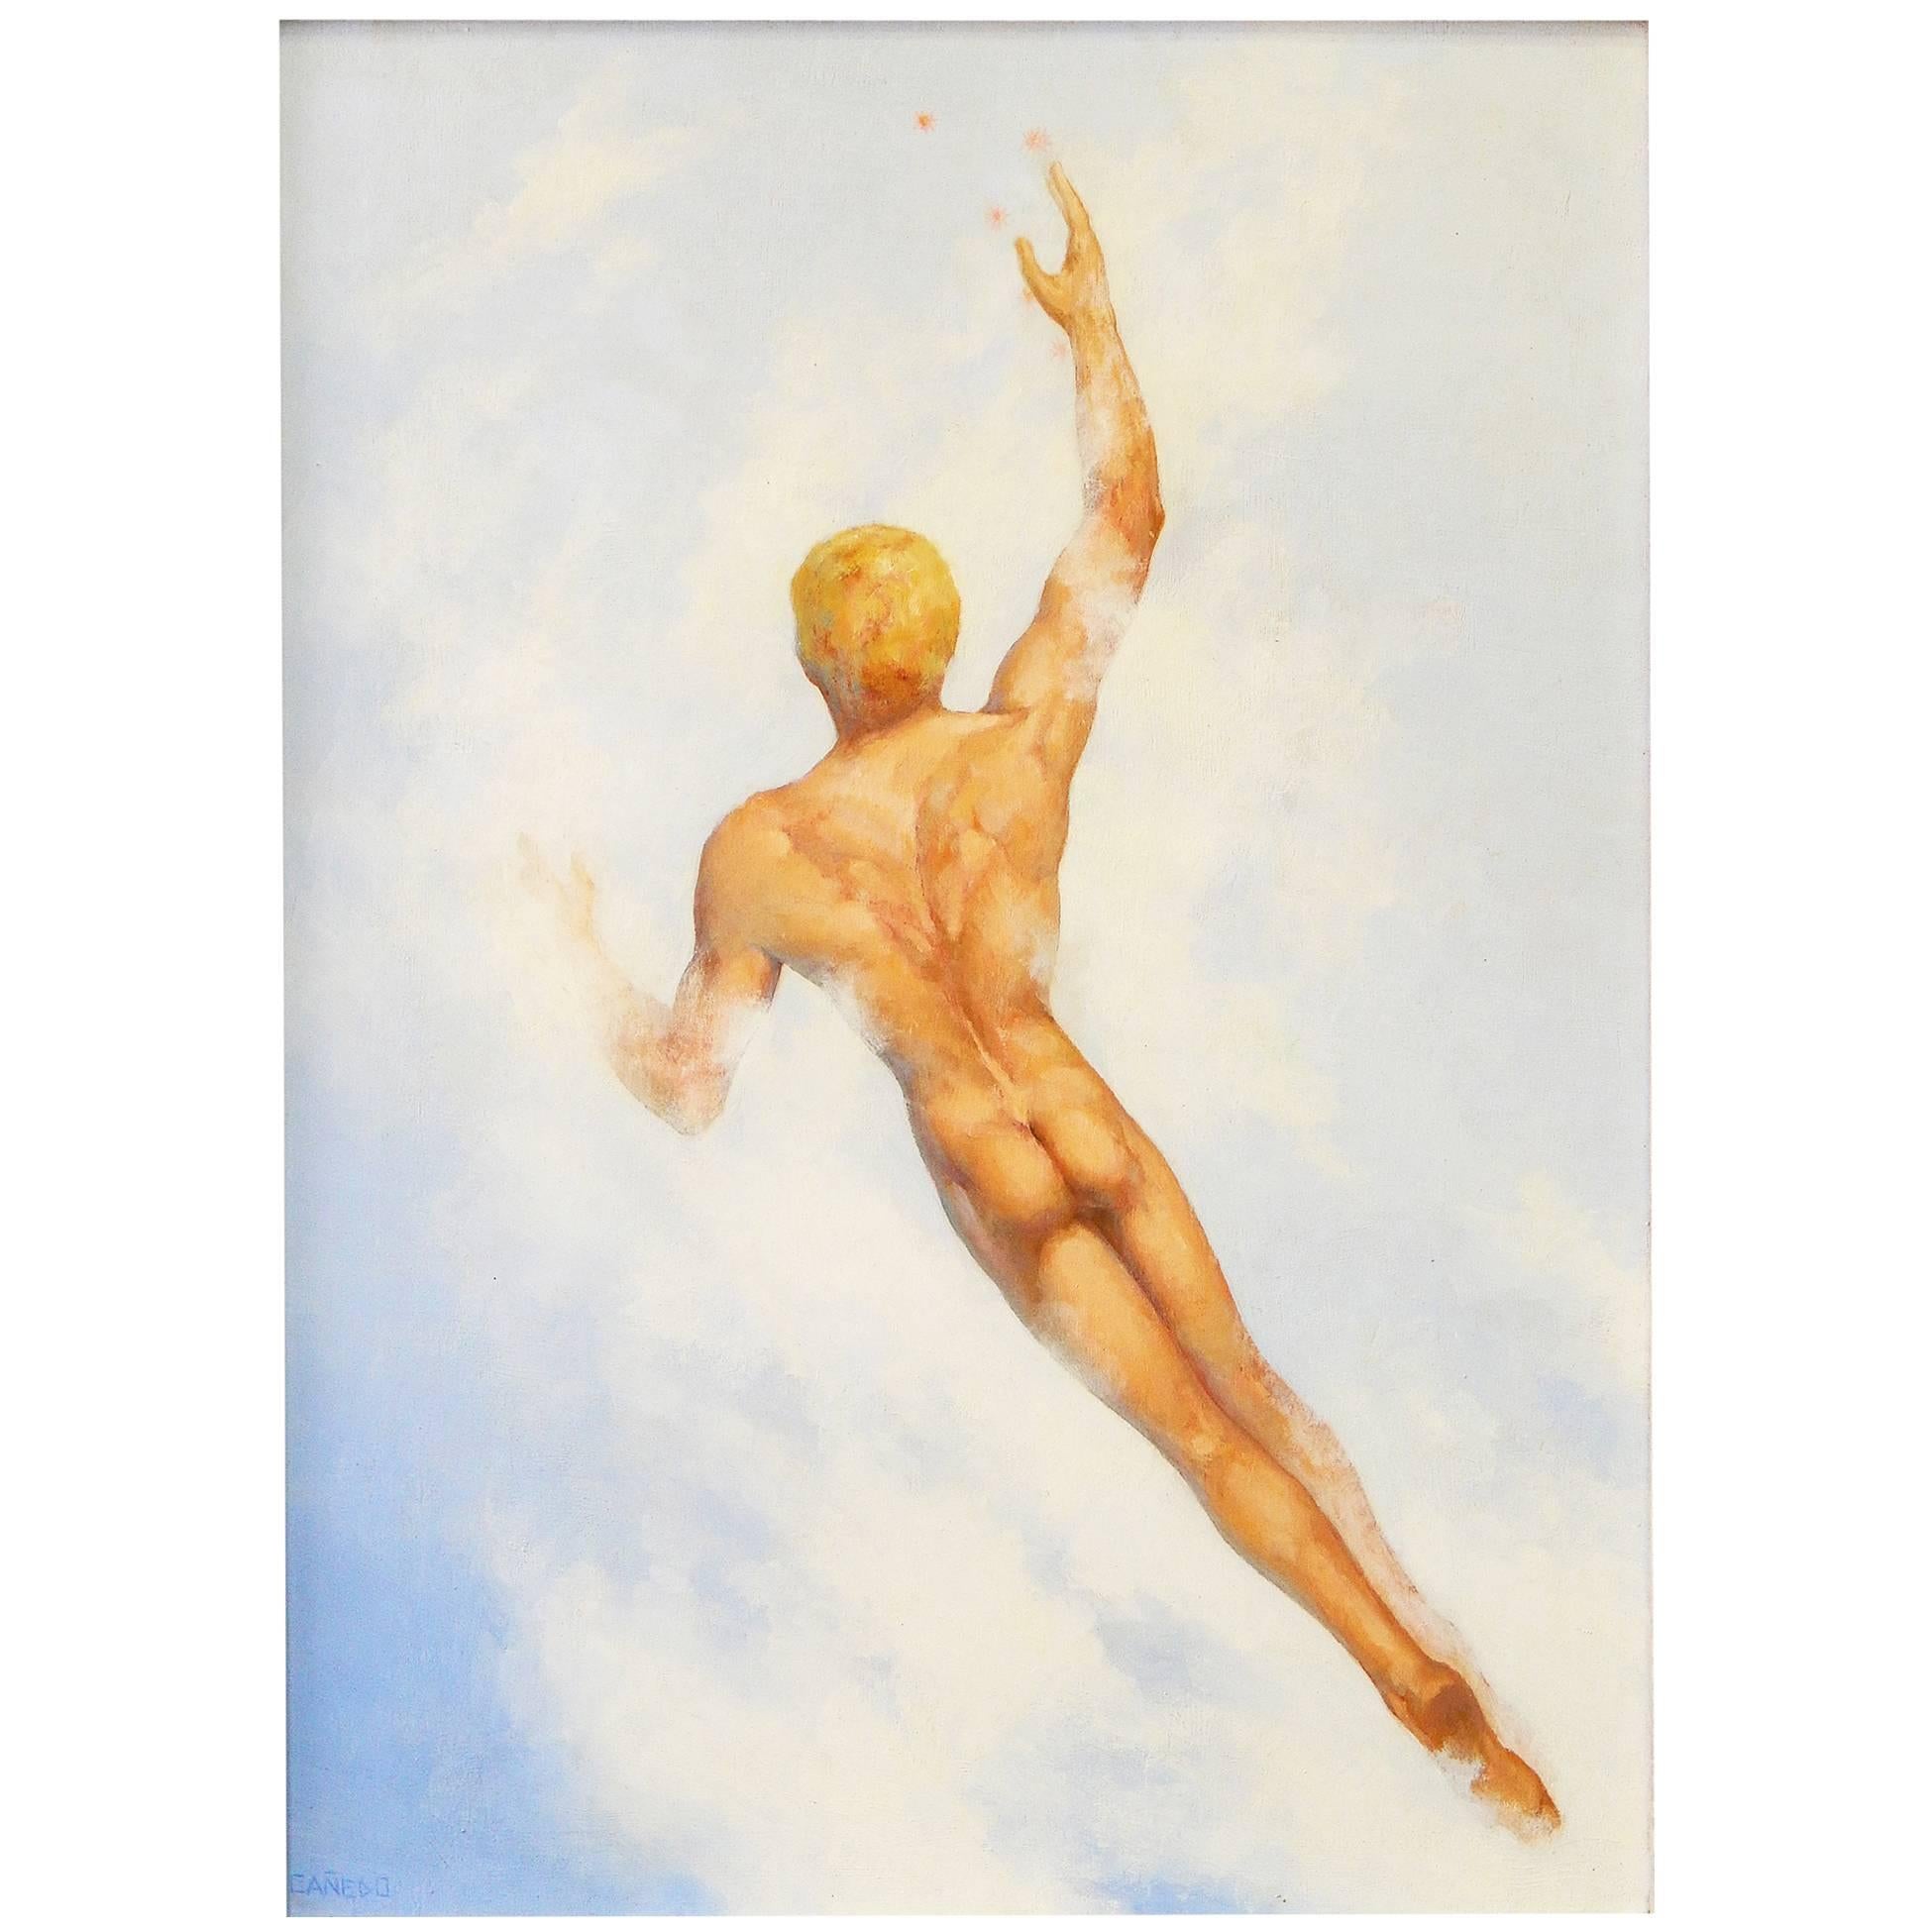 "Reaching for the Stars, " Rare, Stunning Male Nude by Alexander Cañedo For Sale